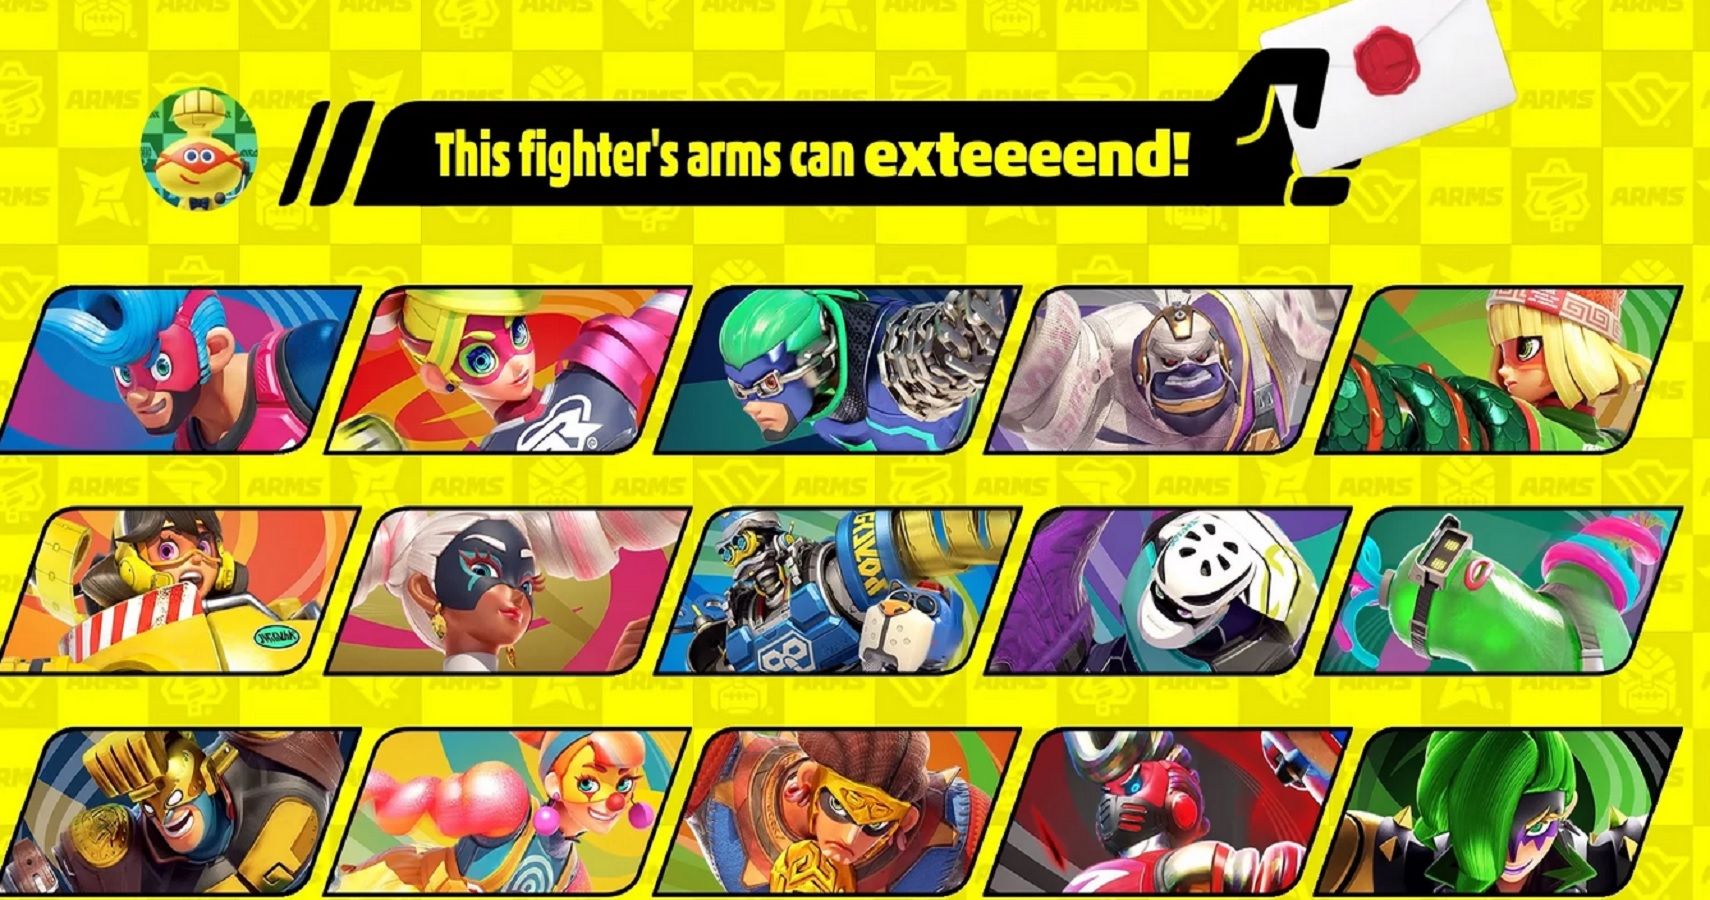 Smash Ultimates Next DLC Fighter Comes From ARMS  But We Dont Know Who It Is